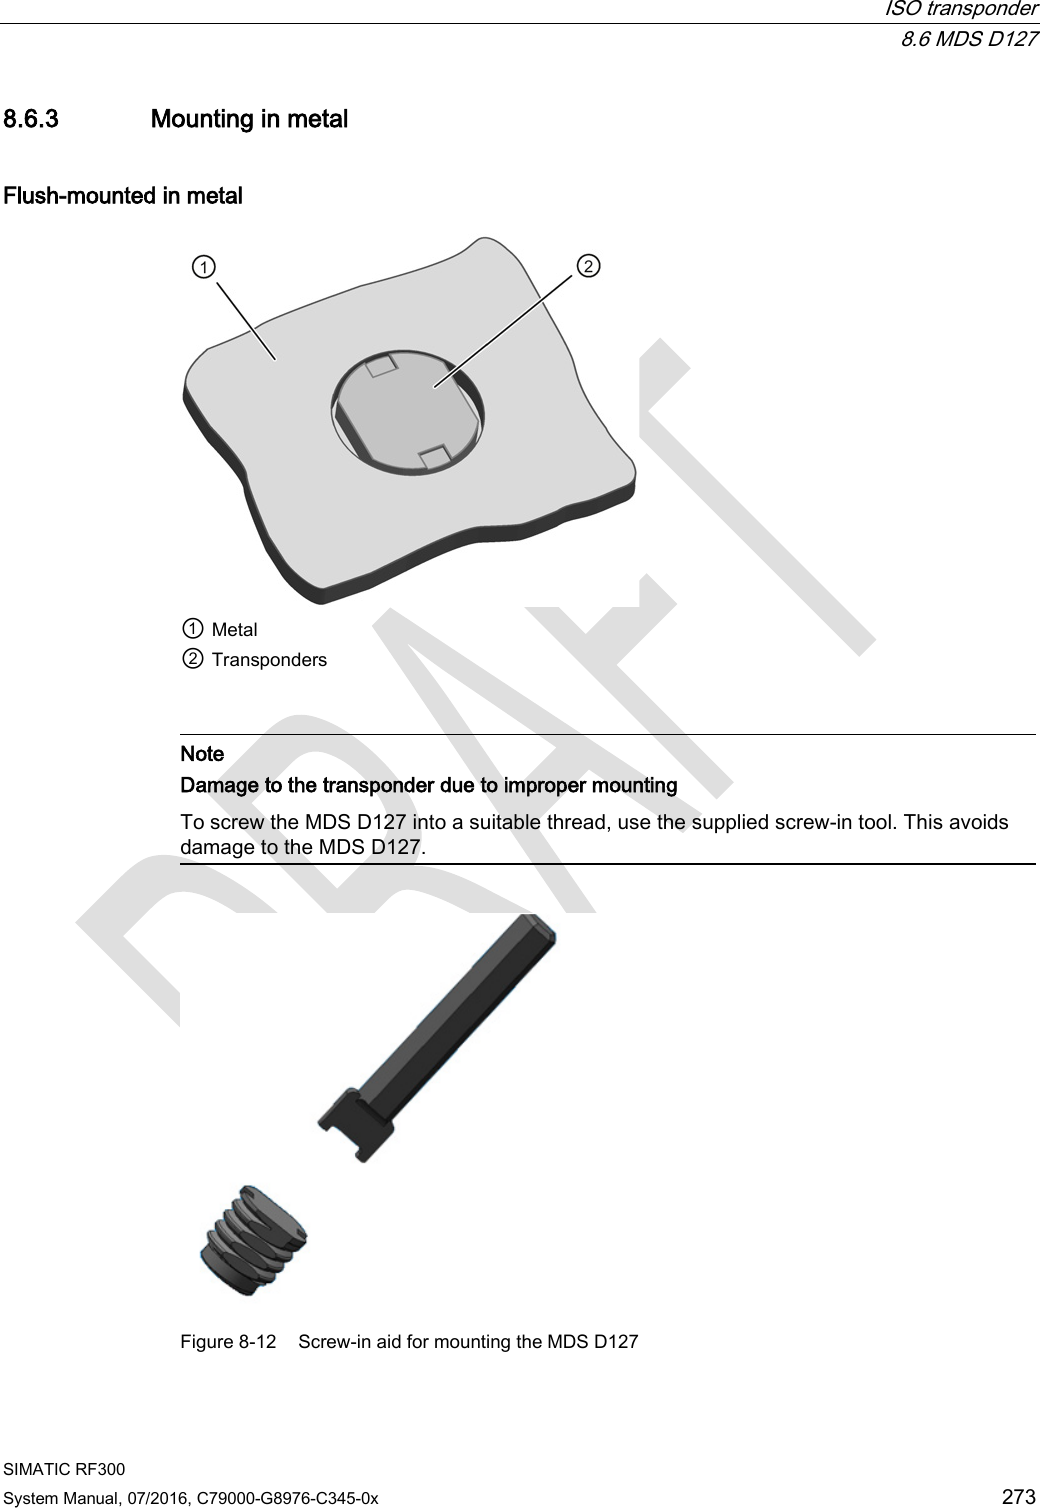  ISO transponder  8.6 MDS D127 SIMATIC RF300 System Manual, 07/2016, C79000-G8976-C345-0x 273 8.6.3 Mounting in metal Flush-mounted in metal  ① Metal ② Transponders    Note Damage to the transponder due to improper mounting To screw the MDS D127 into a suitable thread, use the supplied screw-in tool. This avoids damage to the MDS D127.   Figure 8-12  Screw-in aid for mounting the MDS D127 